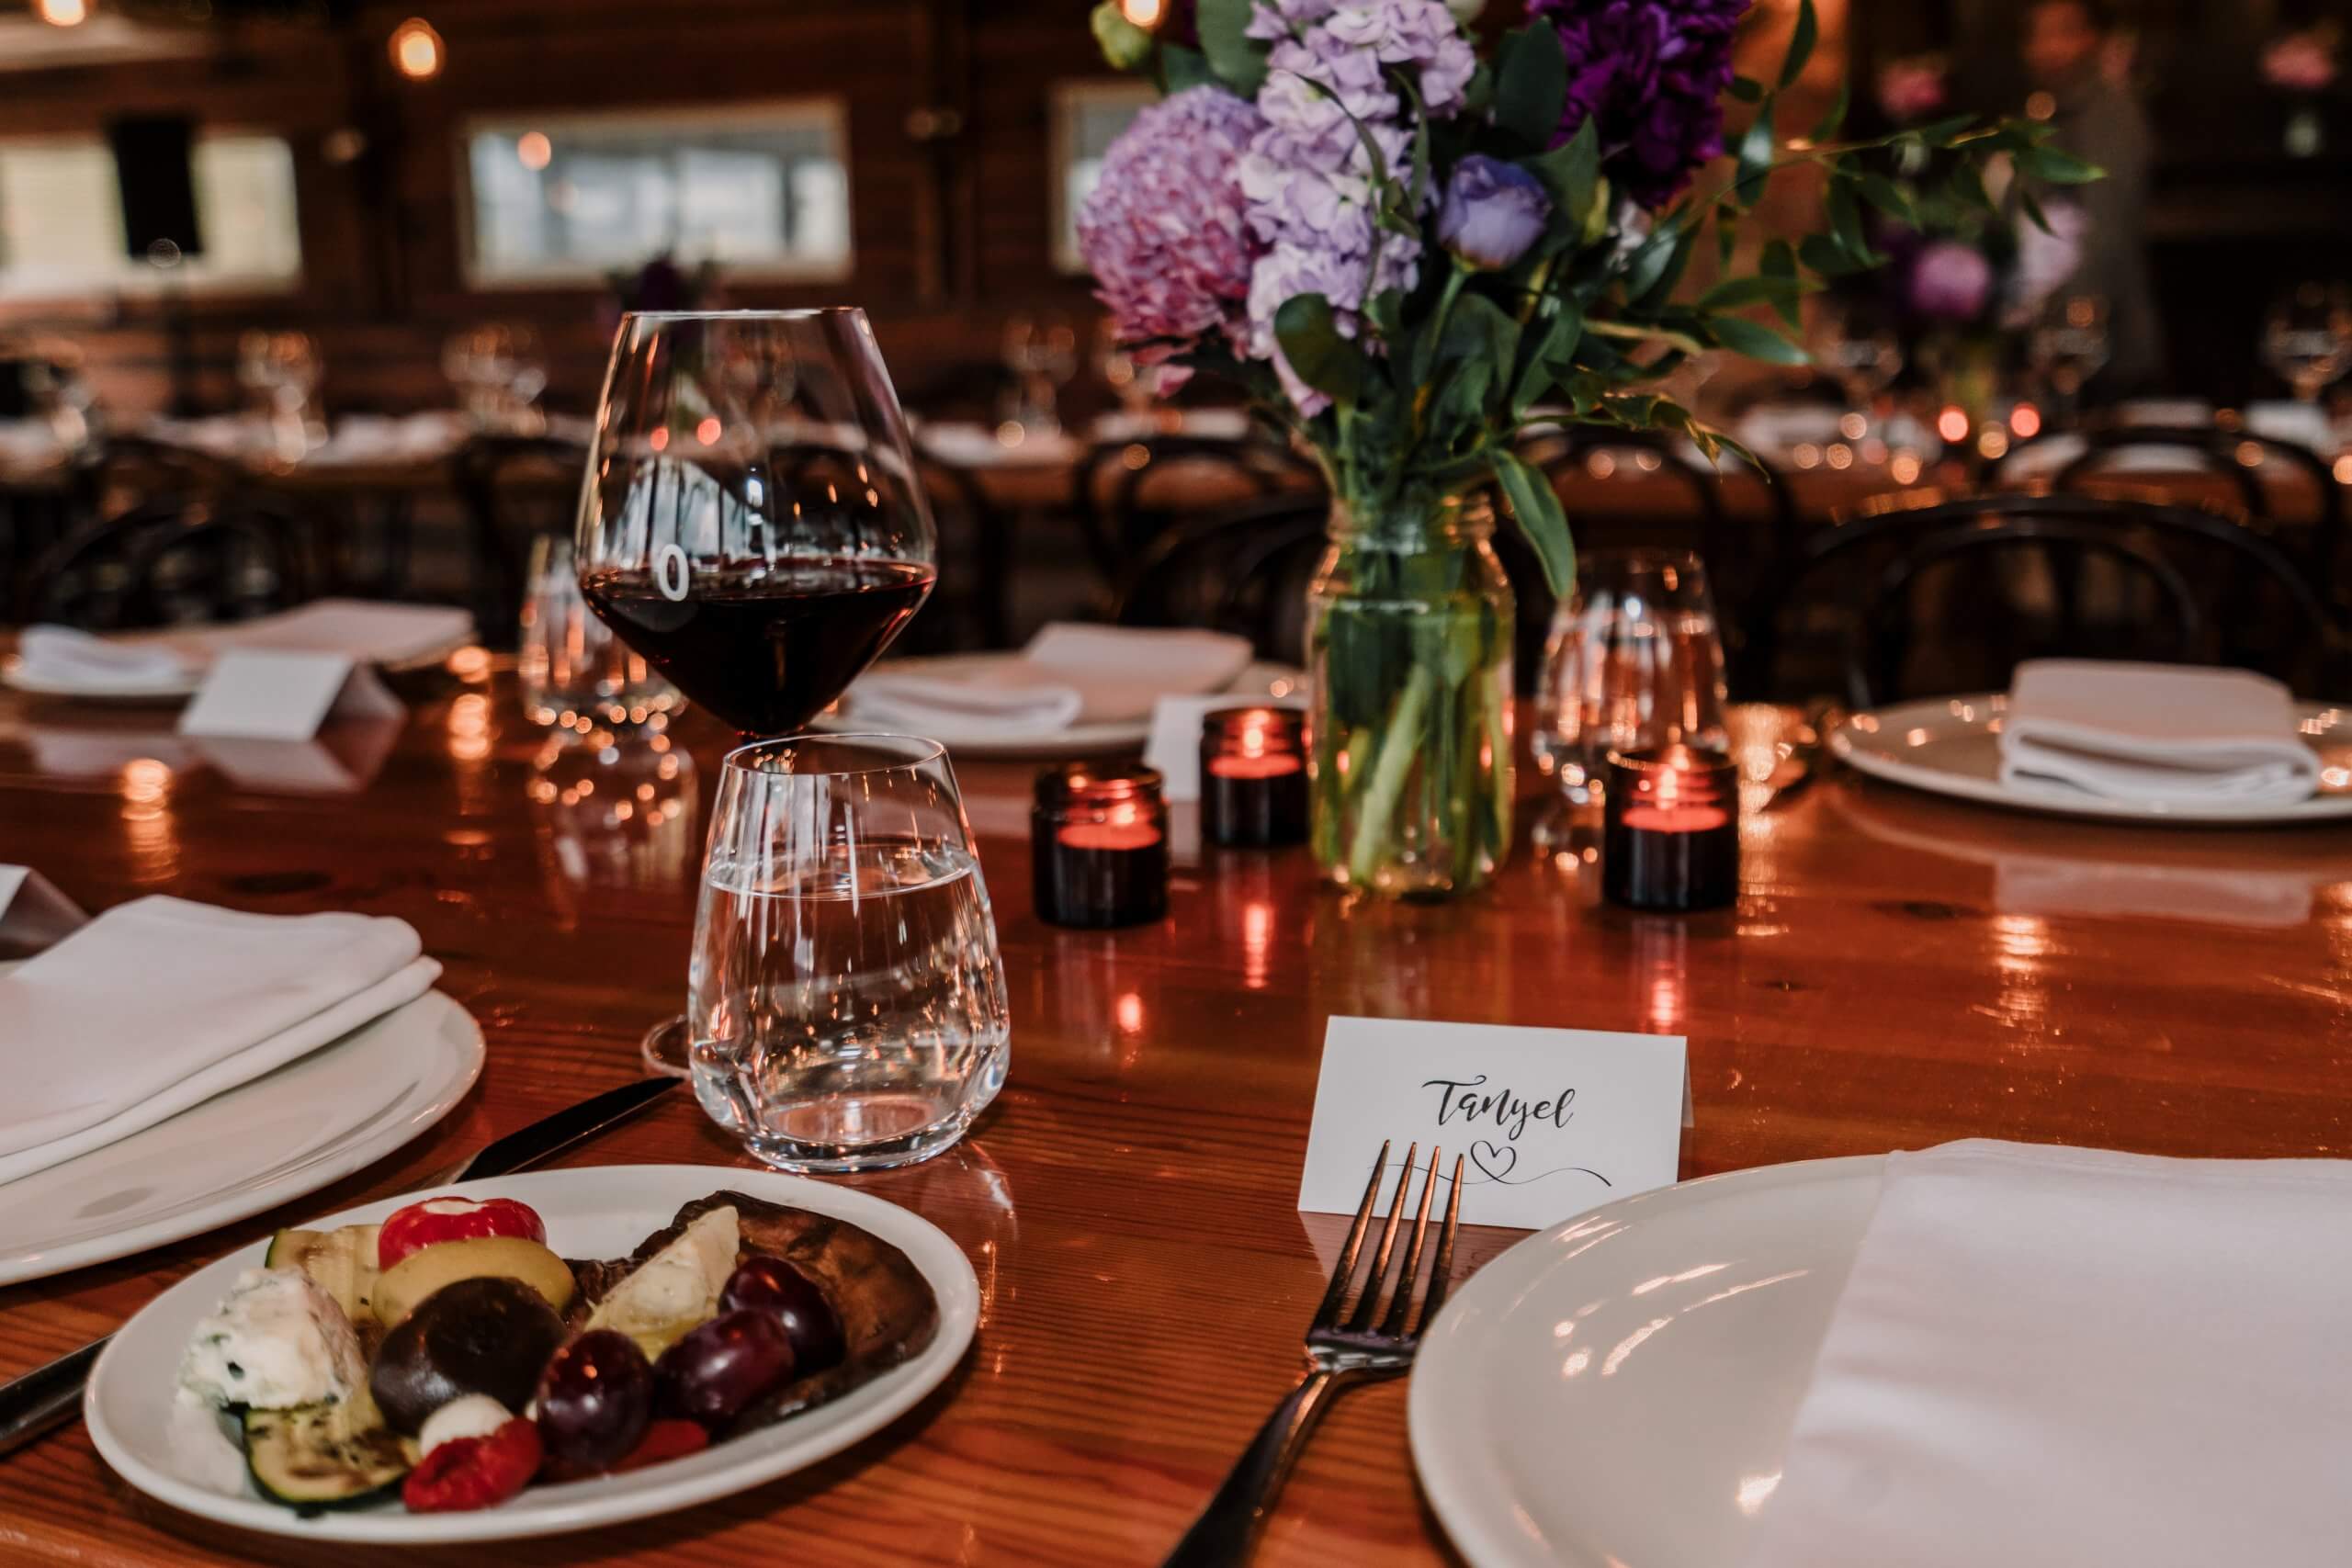 wine and great food was served at the guests' tables, captured by Black Avenue Productions